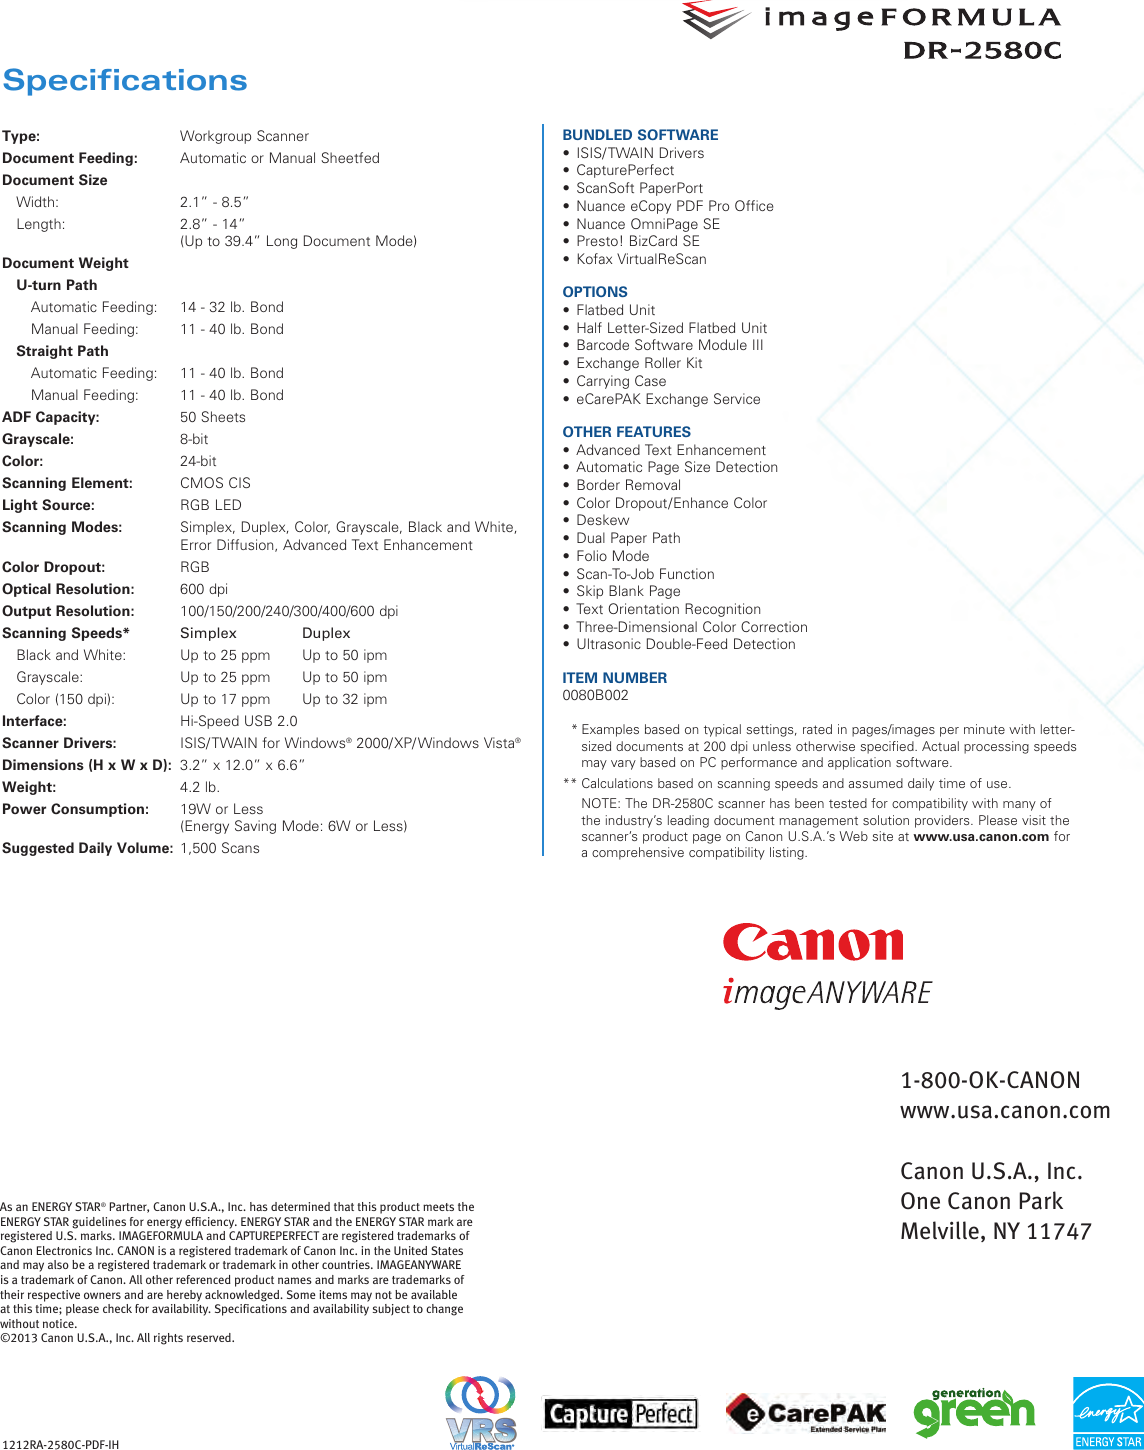 canon scanner software dr-2580c paperport